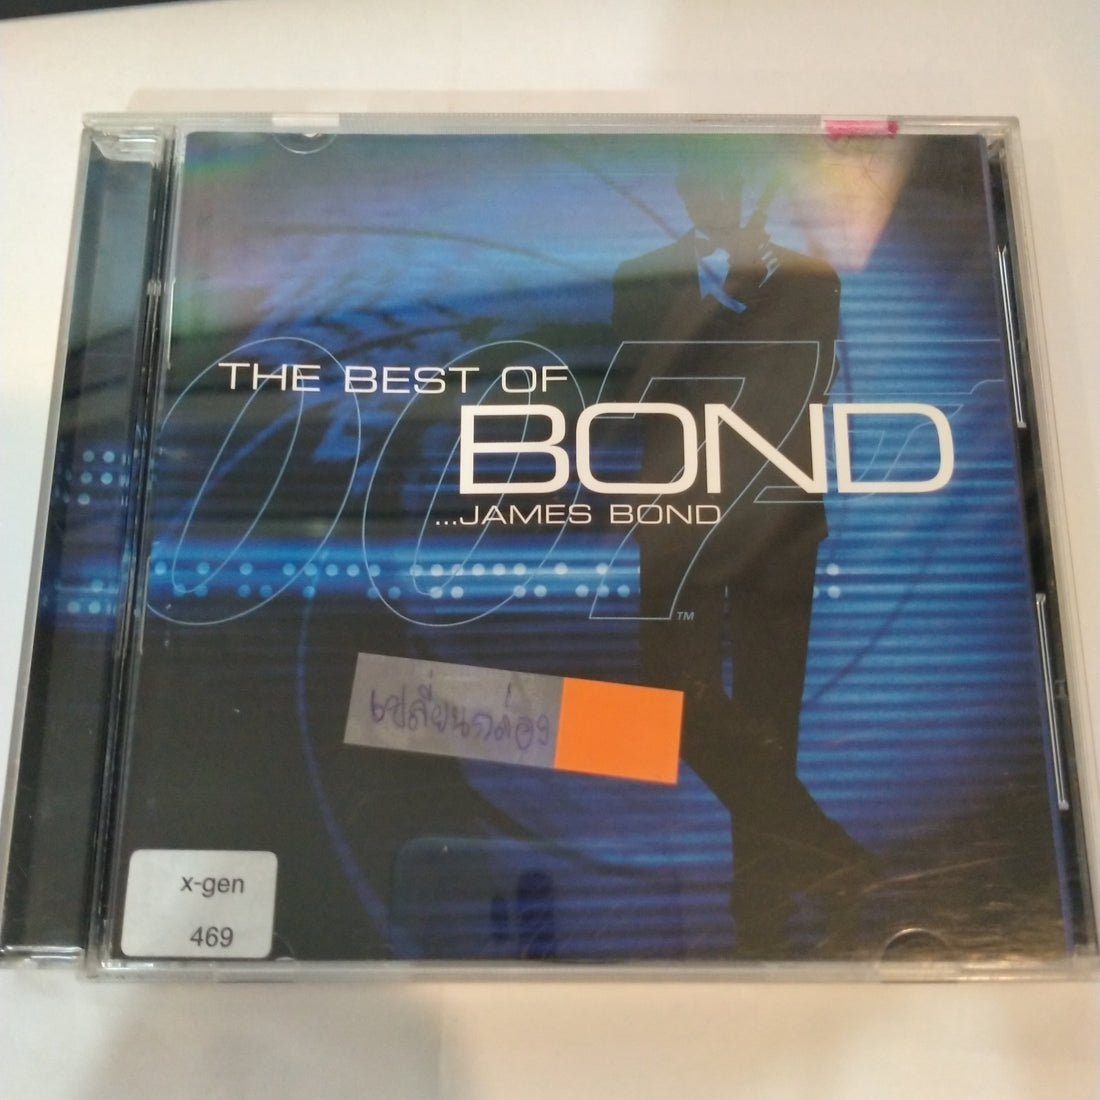 Buy Various The Best Of Bond James Bond Cd Online For A Great Price Restory Music